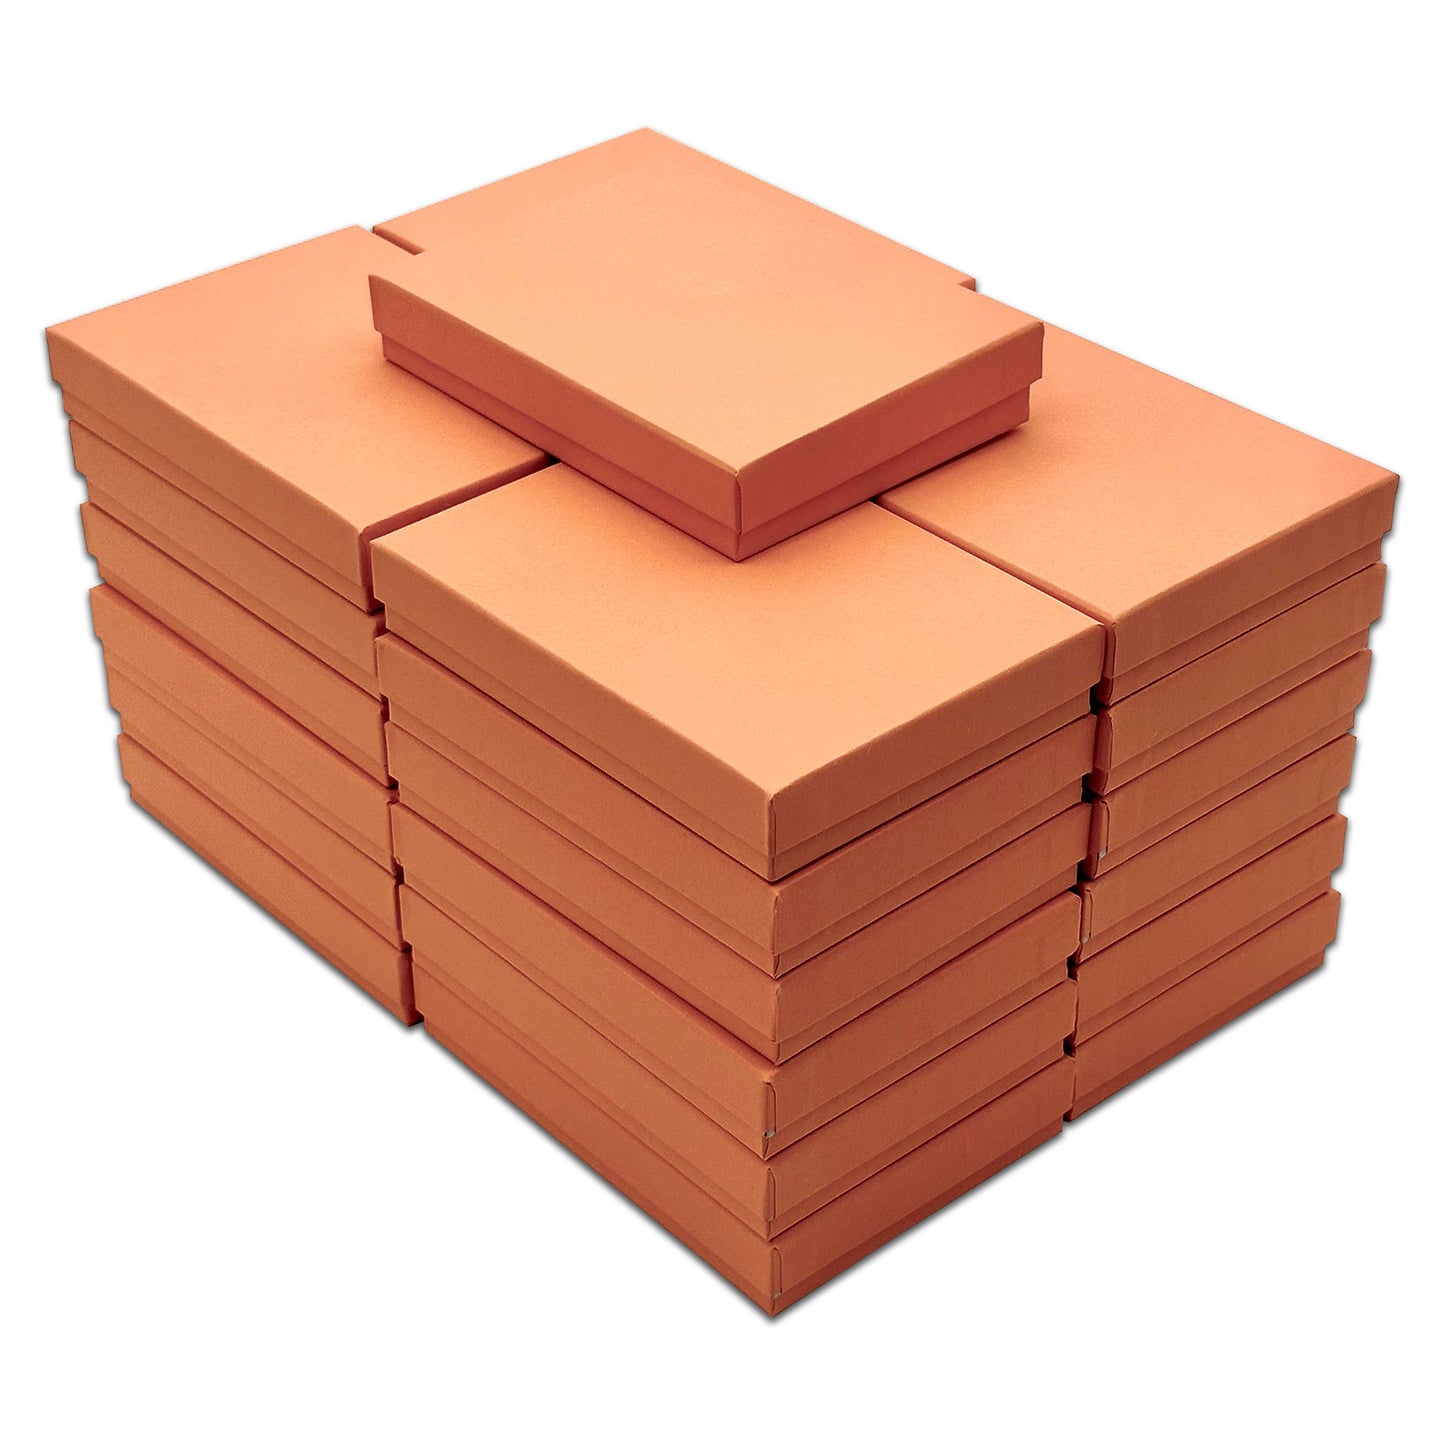 5 7/16" x 3 15/16" x 1" Coral Cotton Filled Paper Box (25-Pack)